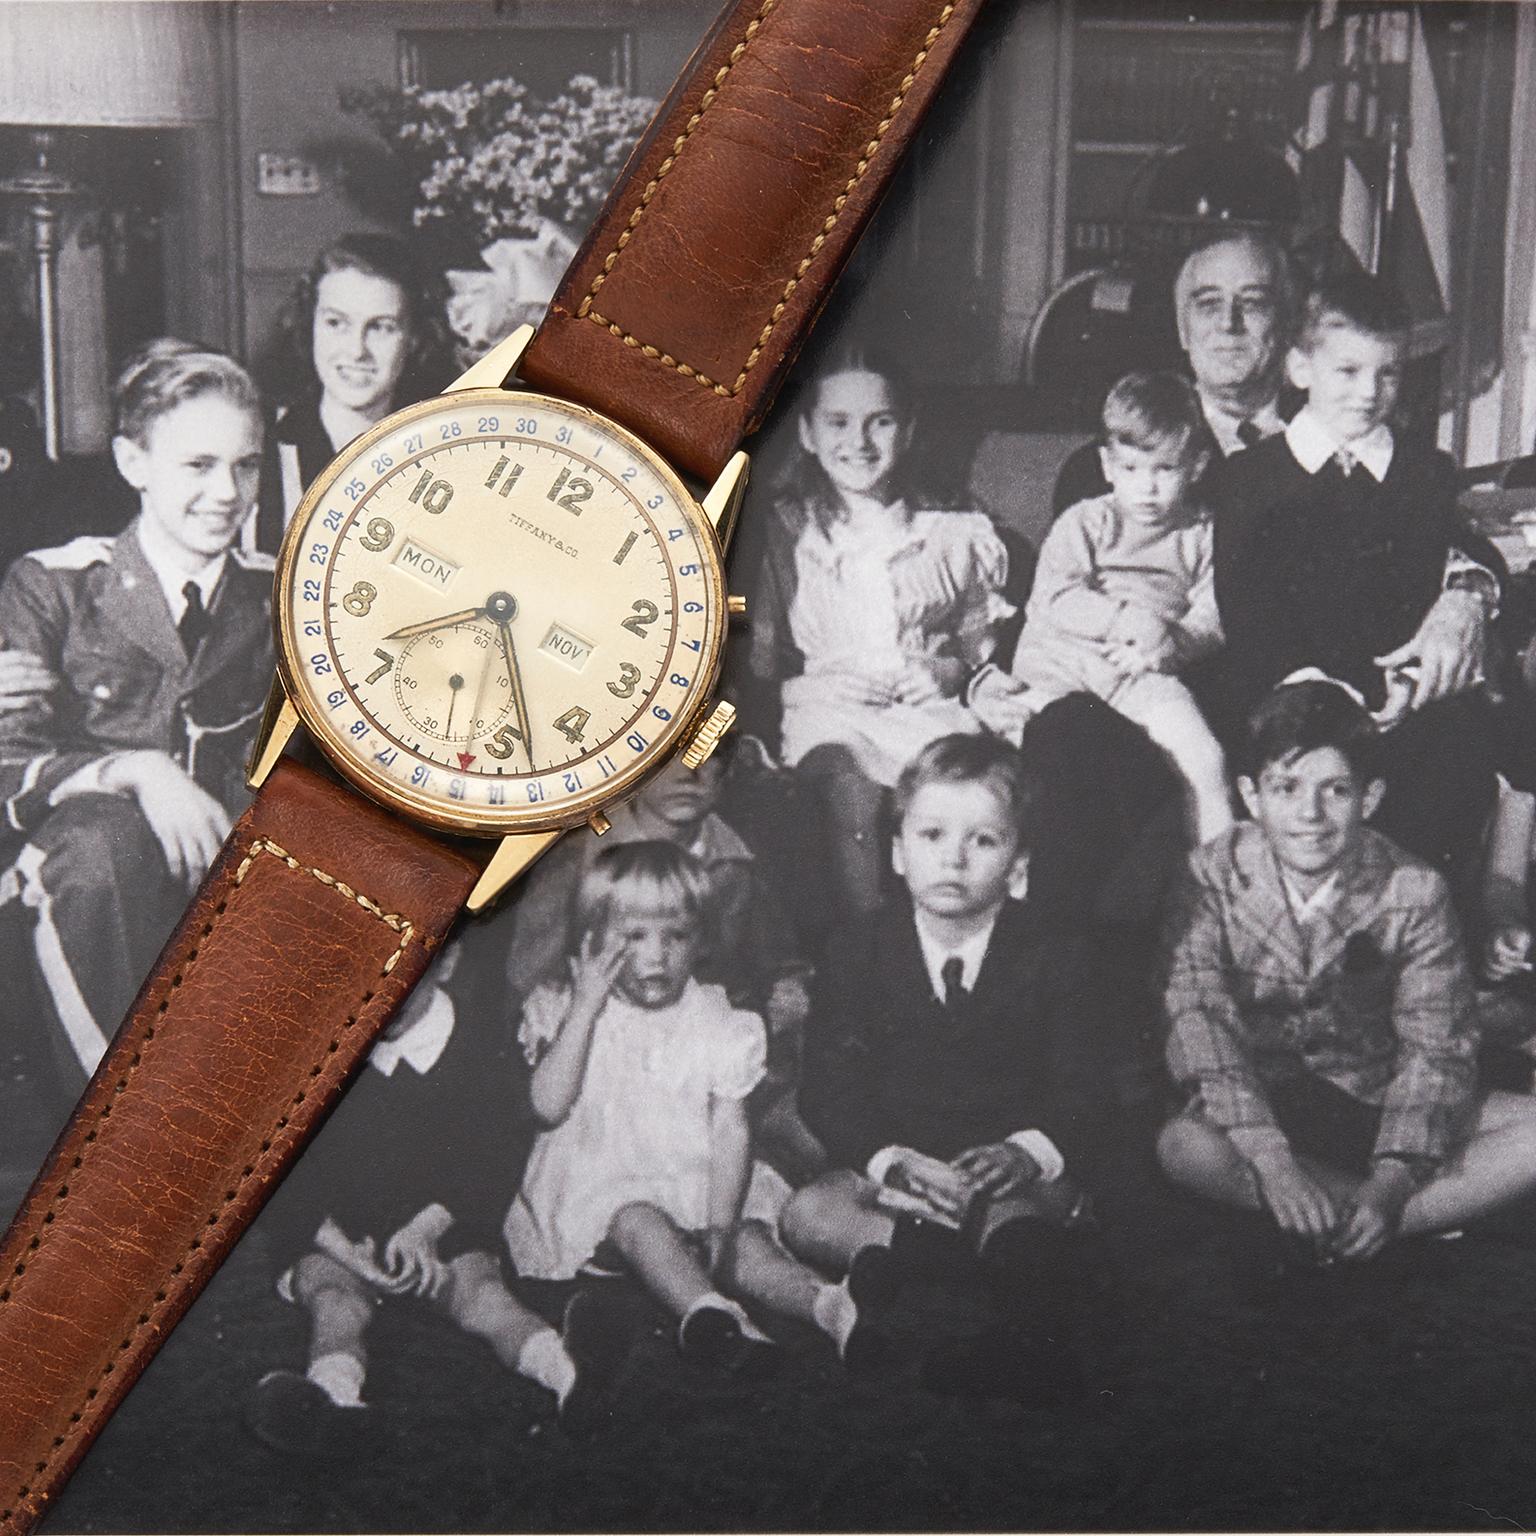 Tiffany timepiece gifted to Franklin D Roosevelt in 1945